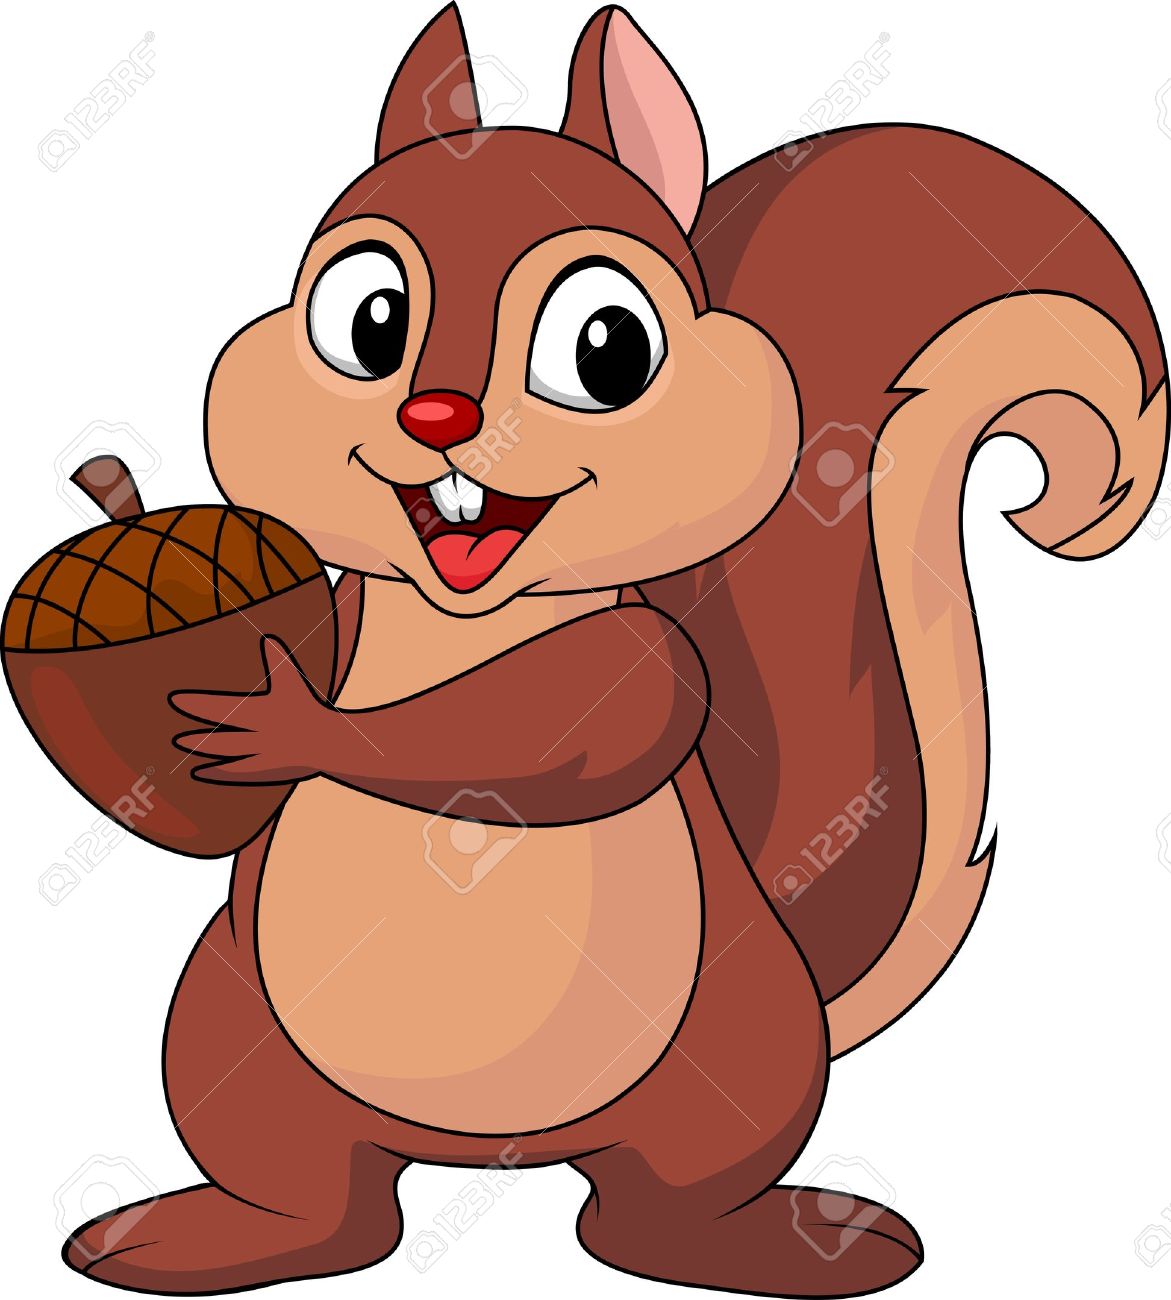 Red Squirrel clipart #9, Download drawings